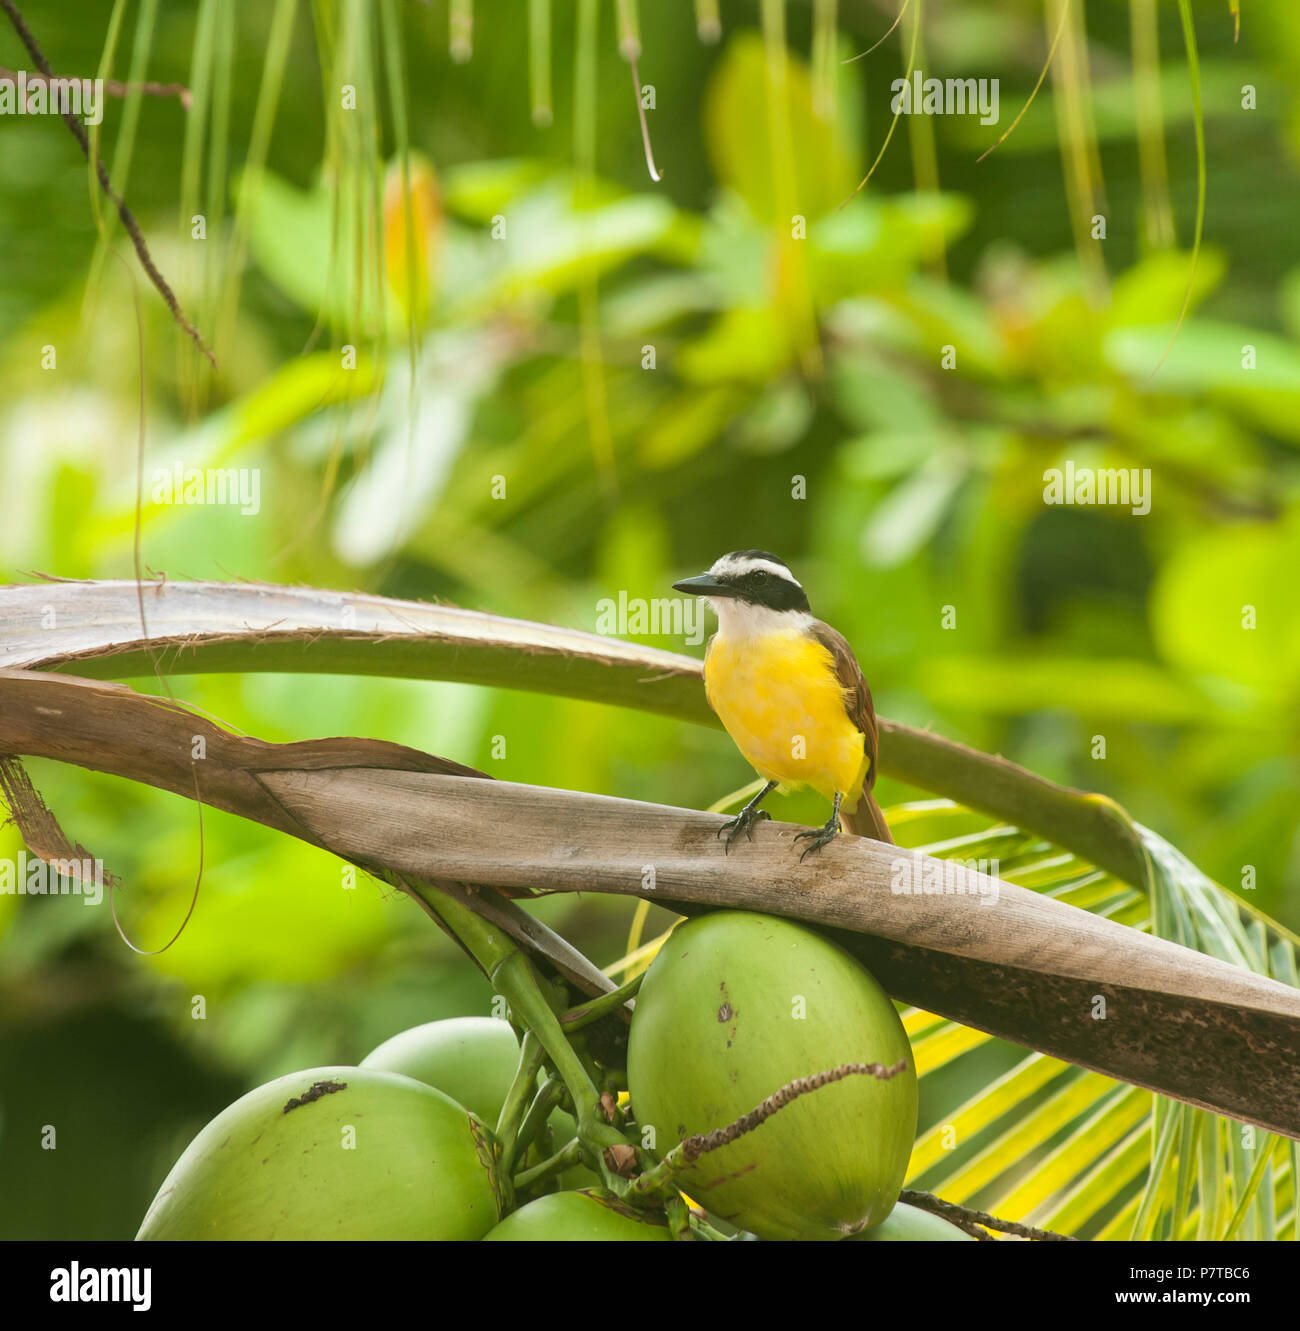 White-ringed flycatcher sits in a coconut palm tree in the tropical rain forest Stock Photo